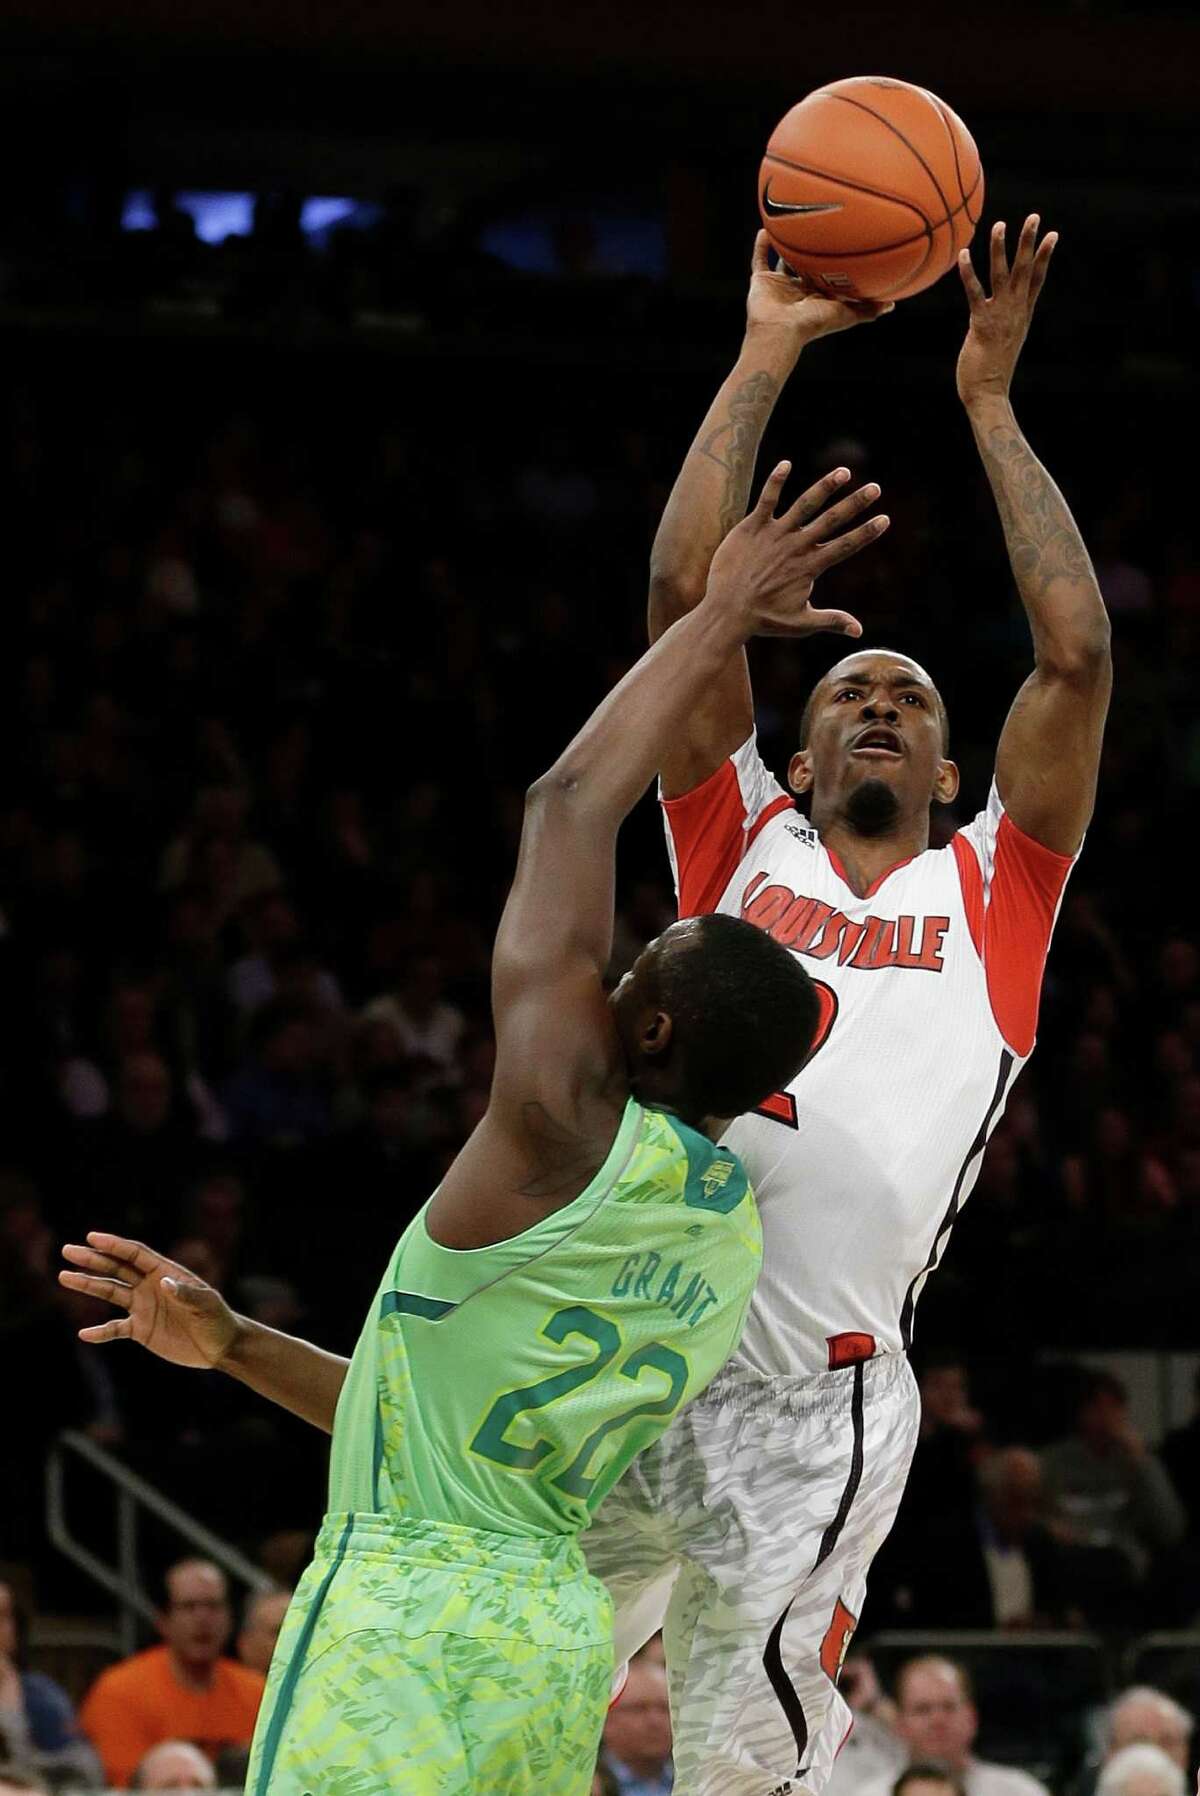 Louisville's Russ Smith (2) shoots over Notre Dame's Jerian Grant (22) during the first half of an NCAA college basketball game at the Big East Conference tournament Friday, March 15, 2013, in New York. (AP Photo/Frank Franklin II)